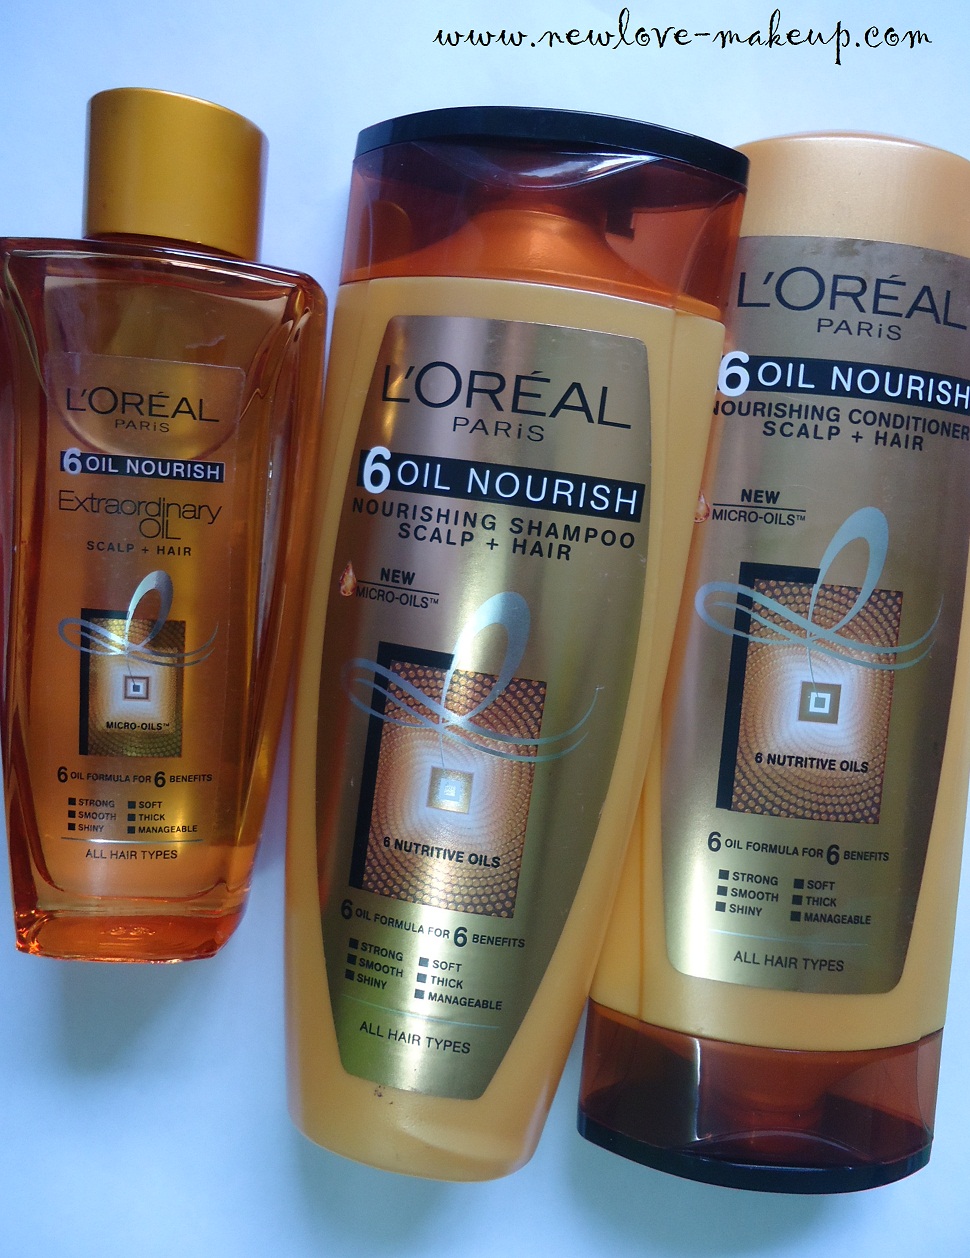 L Oreal Paris 6 Oil Nourish Oil Shampoo And Conditioner Review New Love Makeup